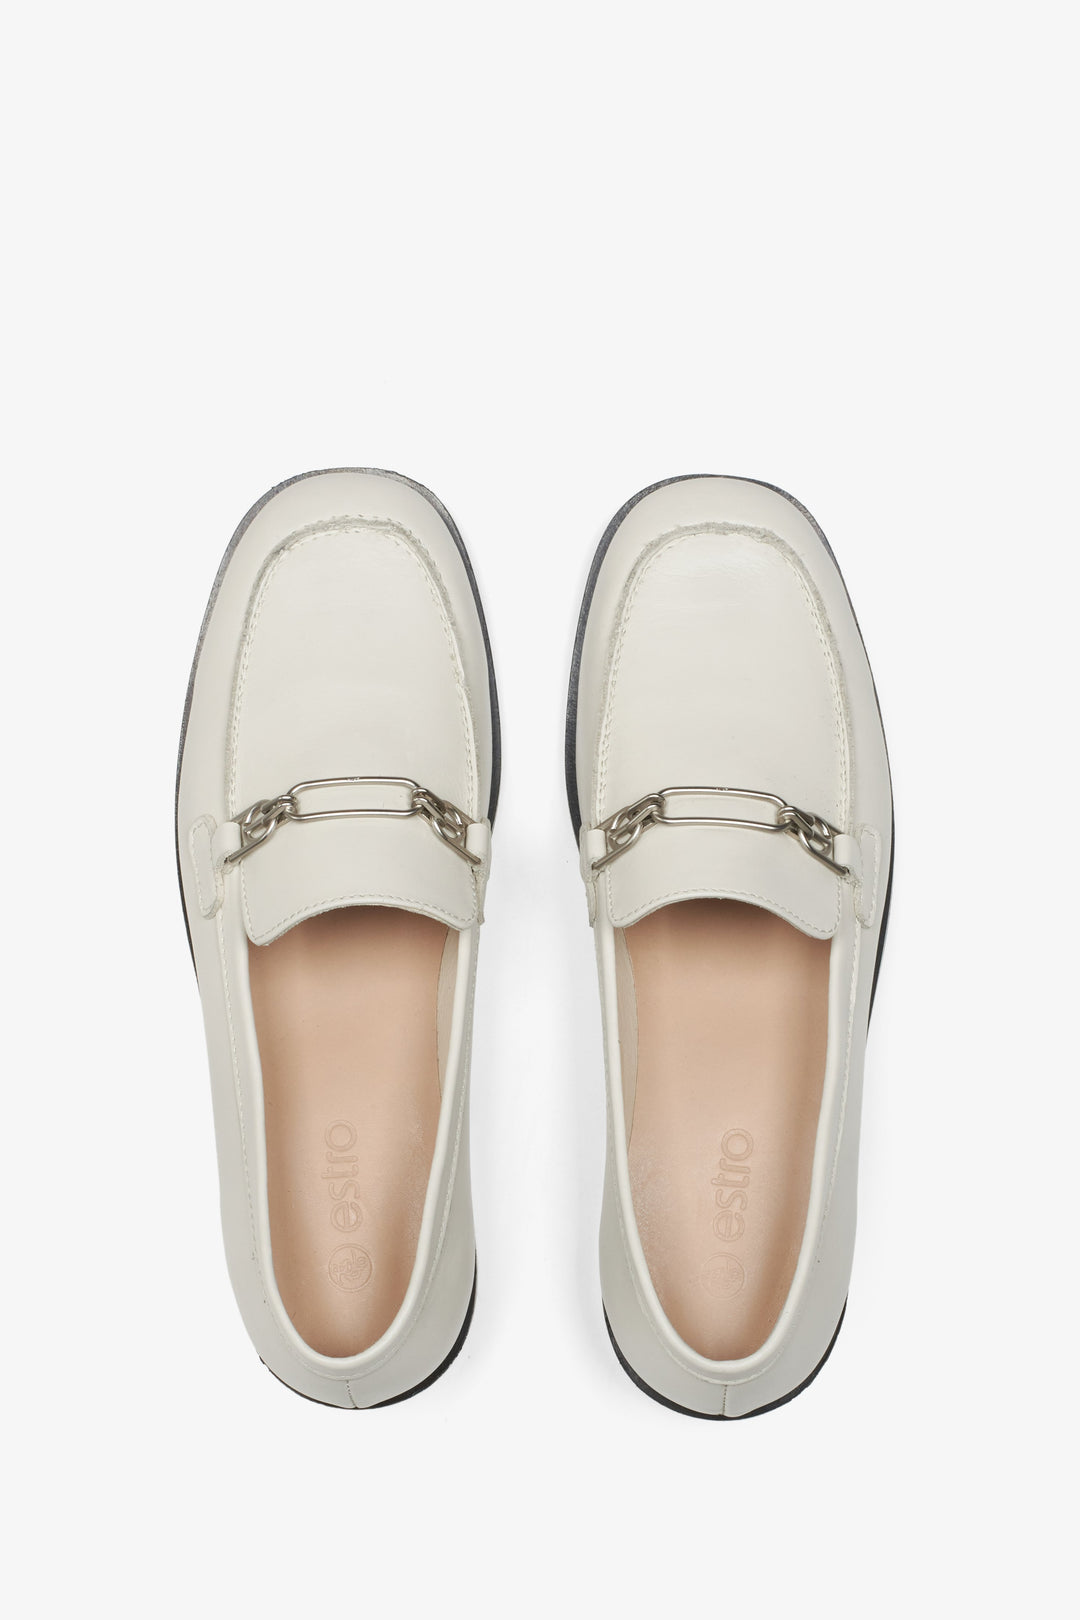 Women's beige leather loafers - presentation from above.